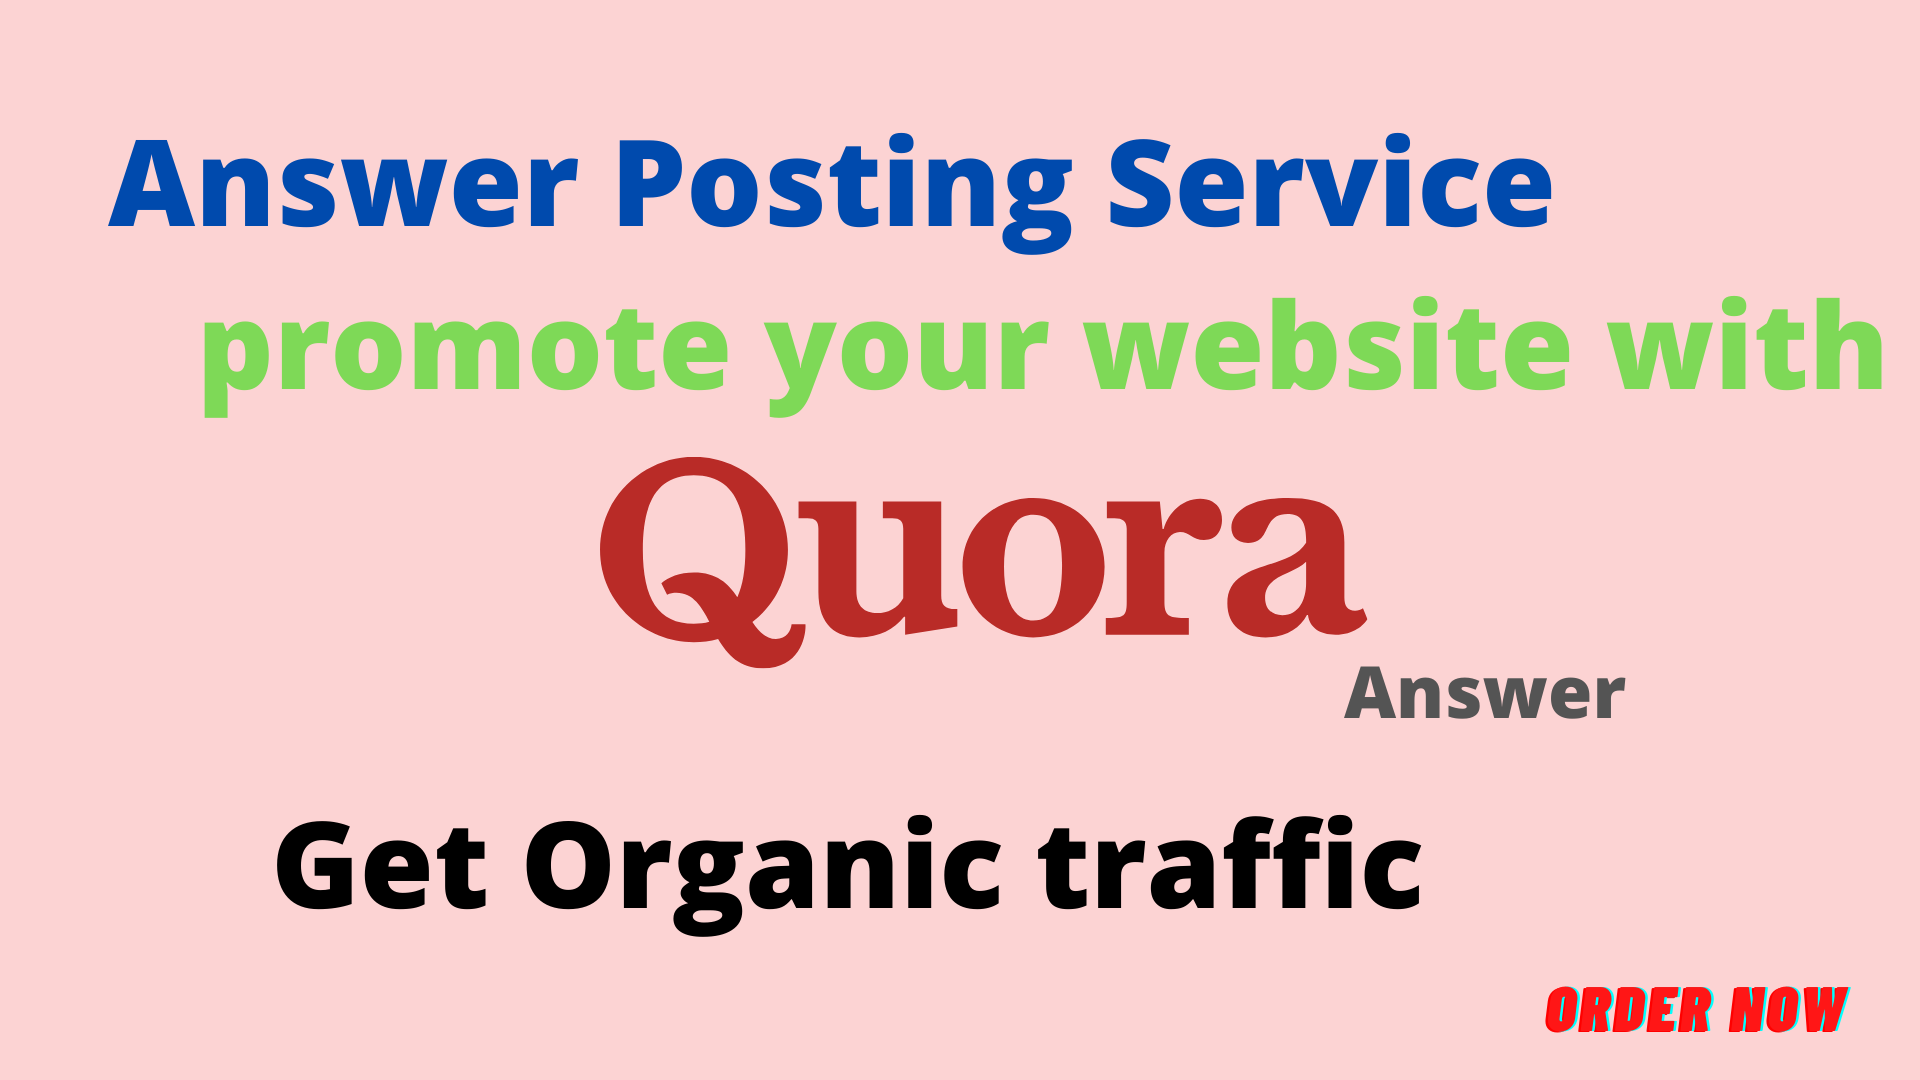 Guaranteed Traffic To Your Website With 10 High Quality Quora Answers 